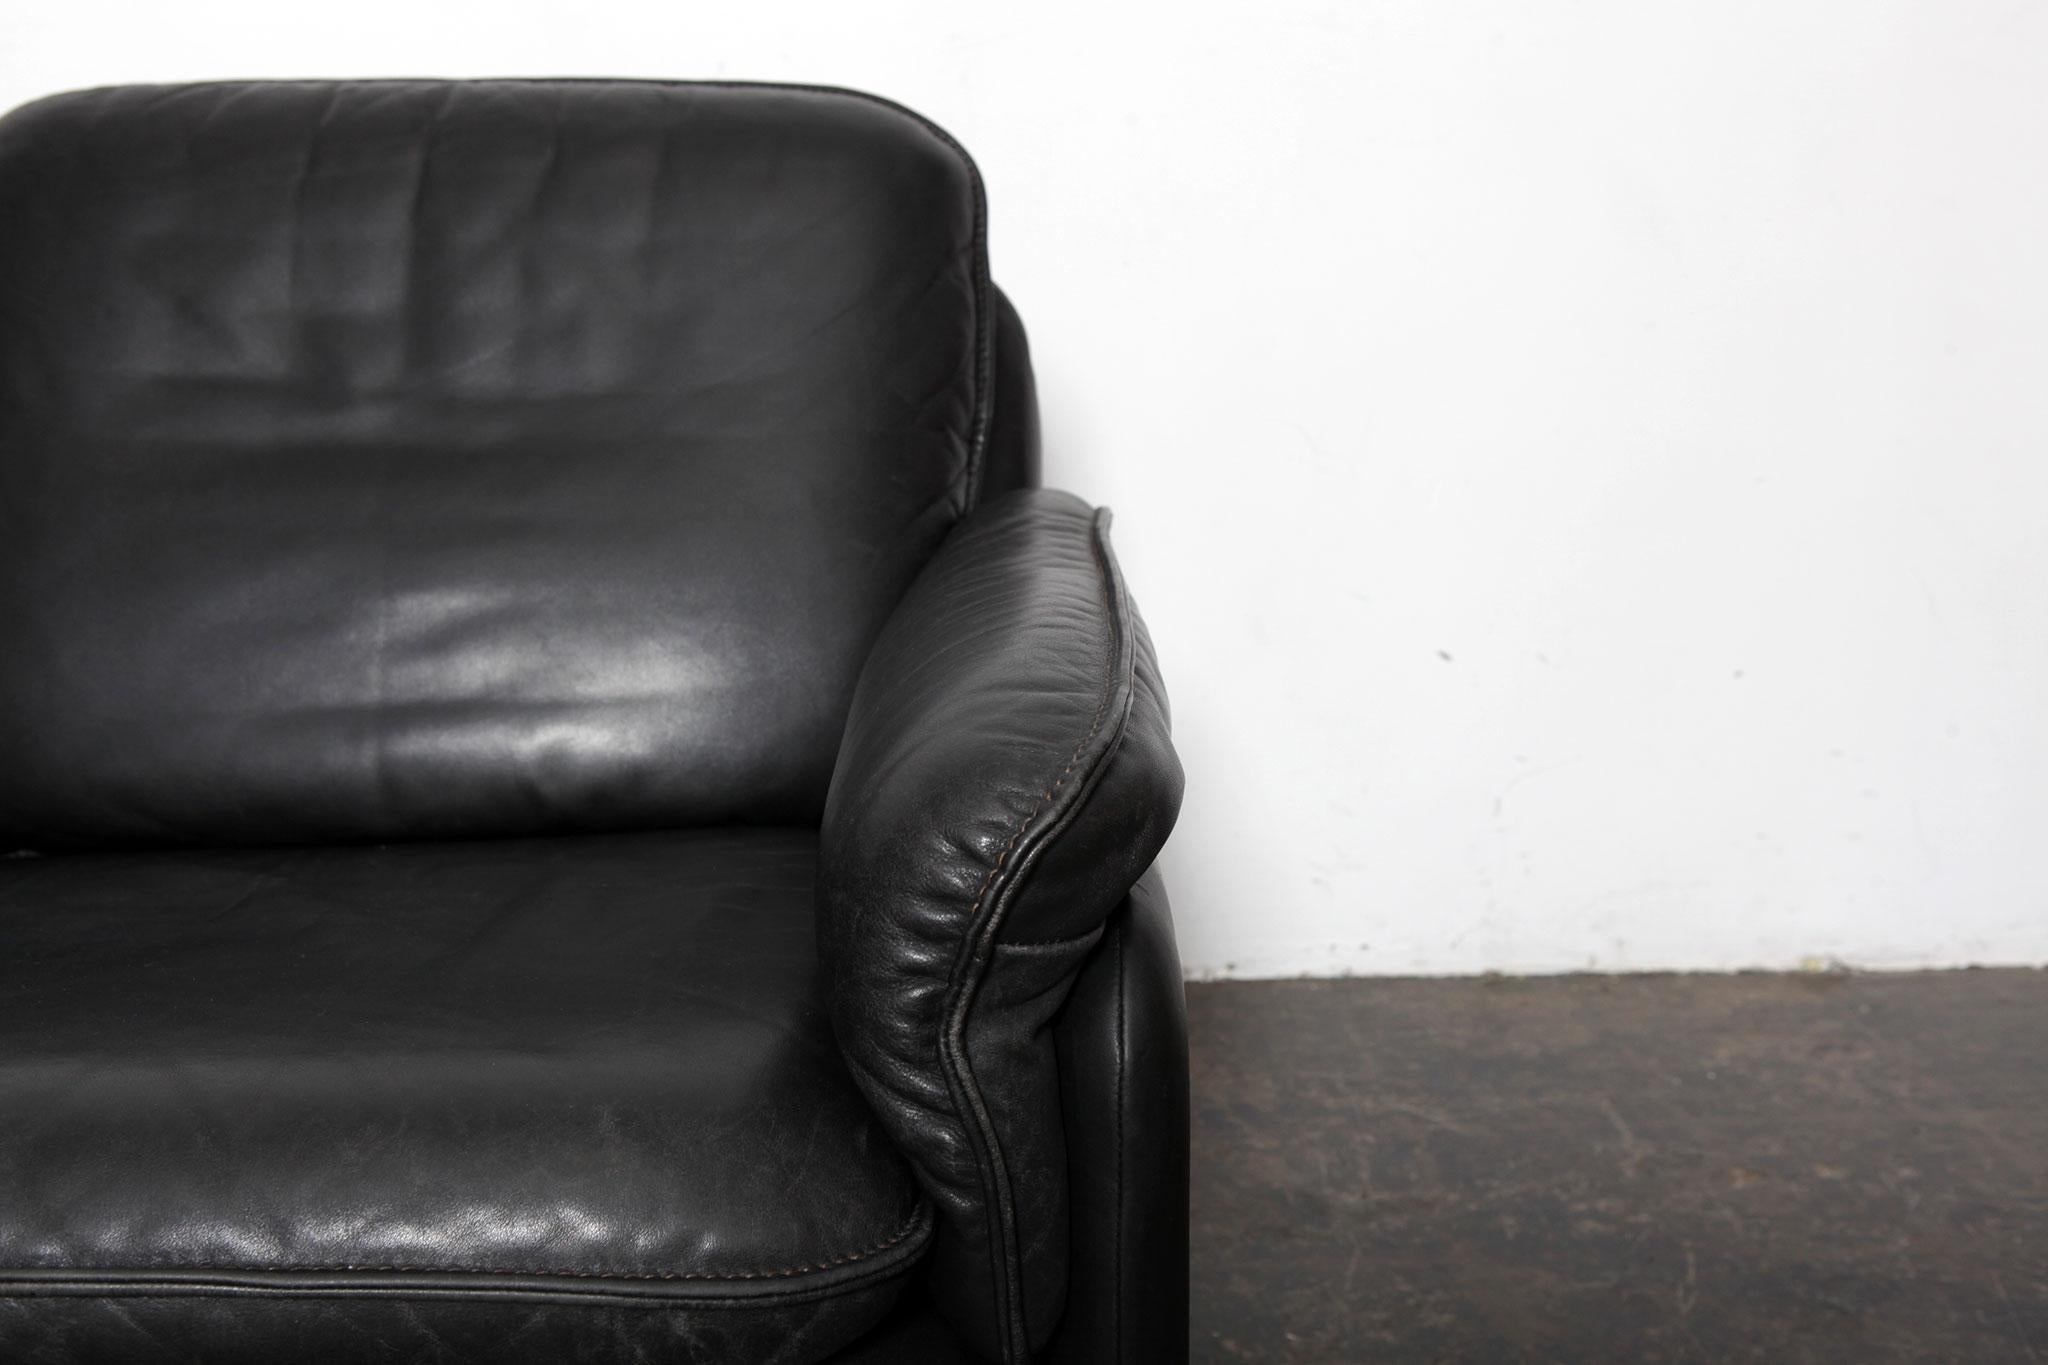 Original Black Leather Recliner Chair from De Sede, Model DS-50, Switzerland In Good Condition For Sale In North Hollywood, CA